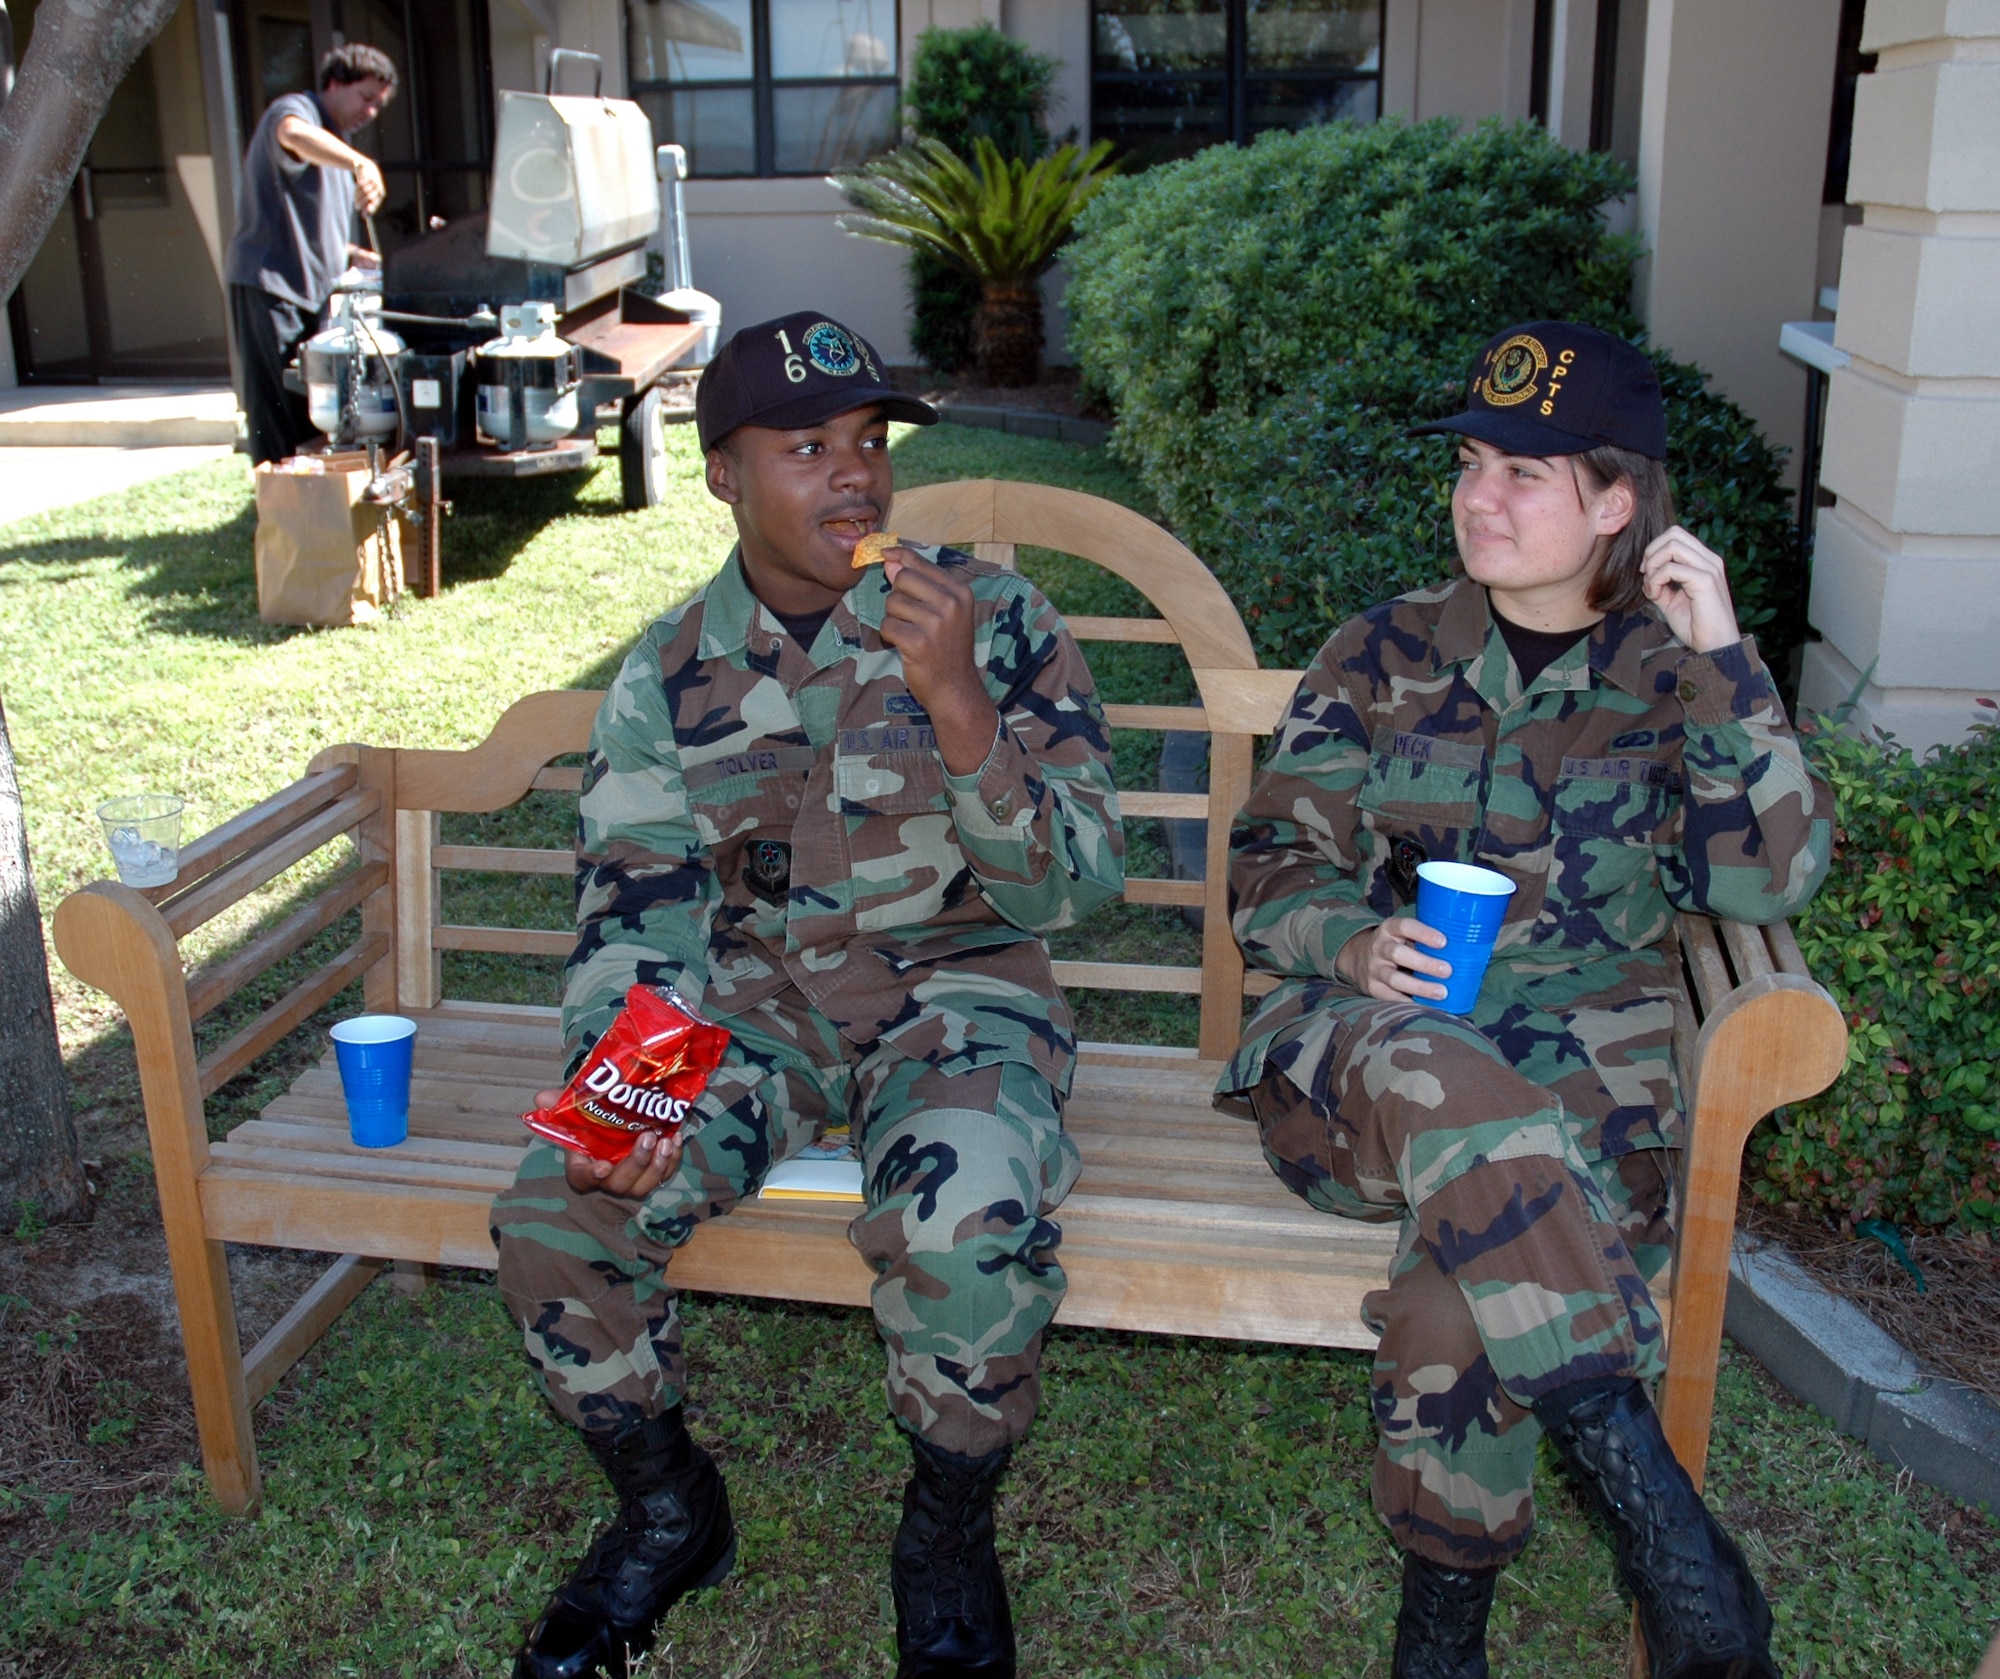 Military dress code and civilian attire standards will be enforced at all dining facilities on Hurlburt.